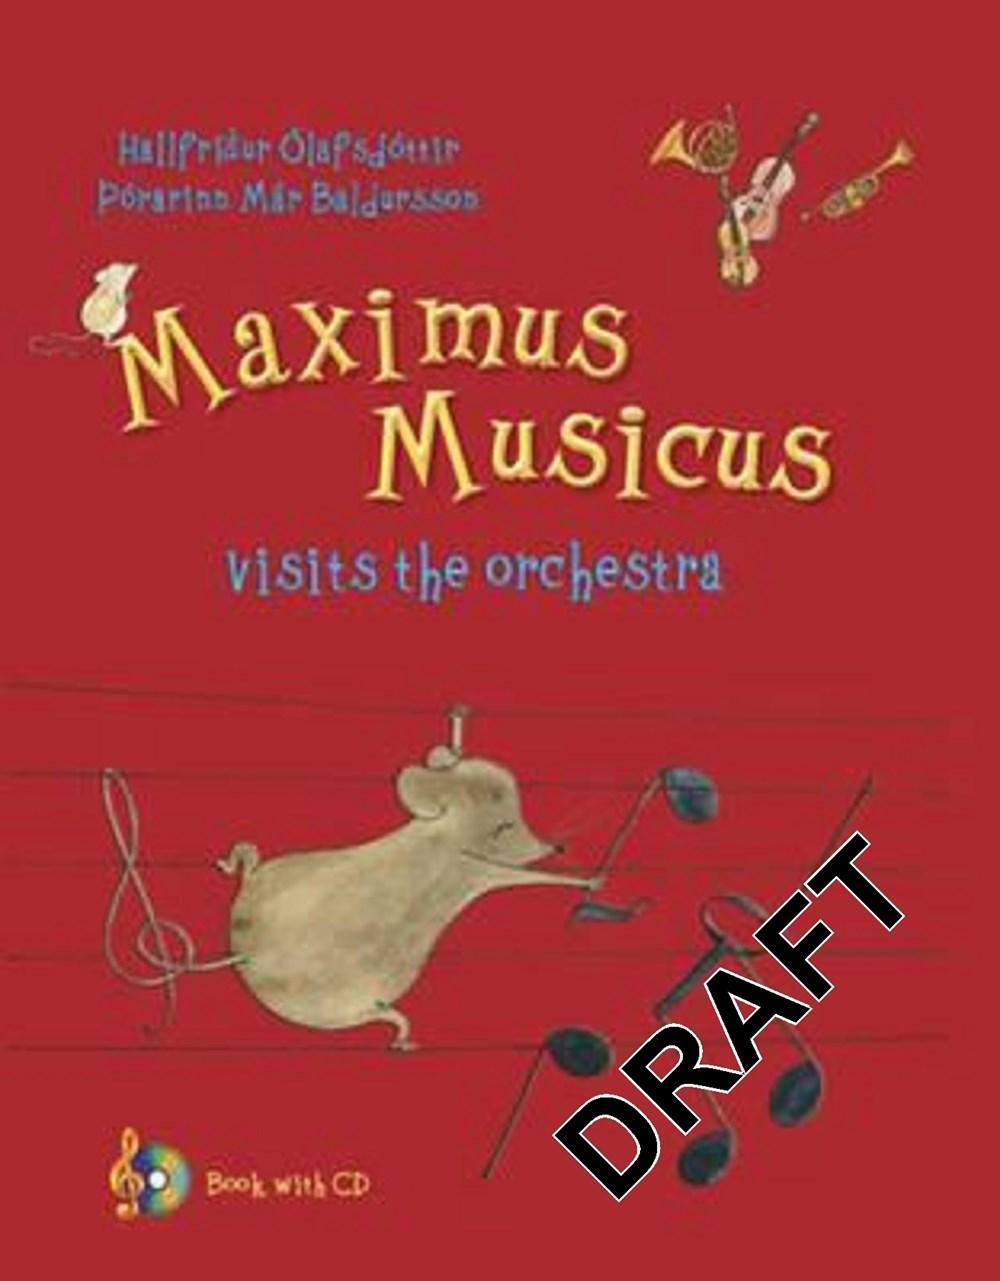 EDDA USA AUGUS T 2017 Maximus Musicus Visits the Orchestra Original Score on an audio CD included Hallfridur Olafsdottir The adventures of Maximus have received numerous awards globally and the mouse